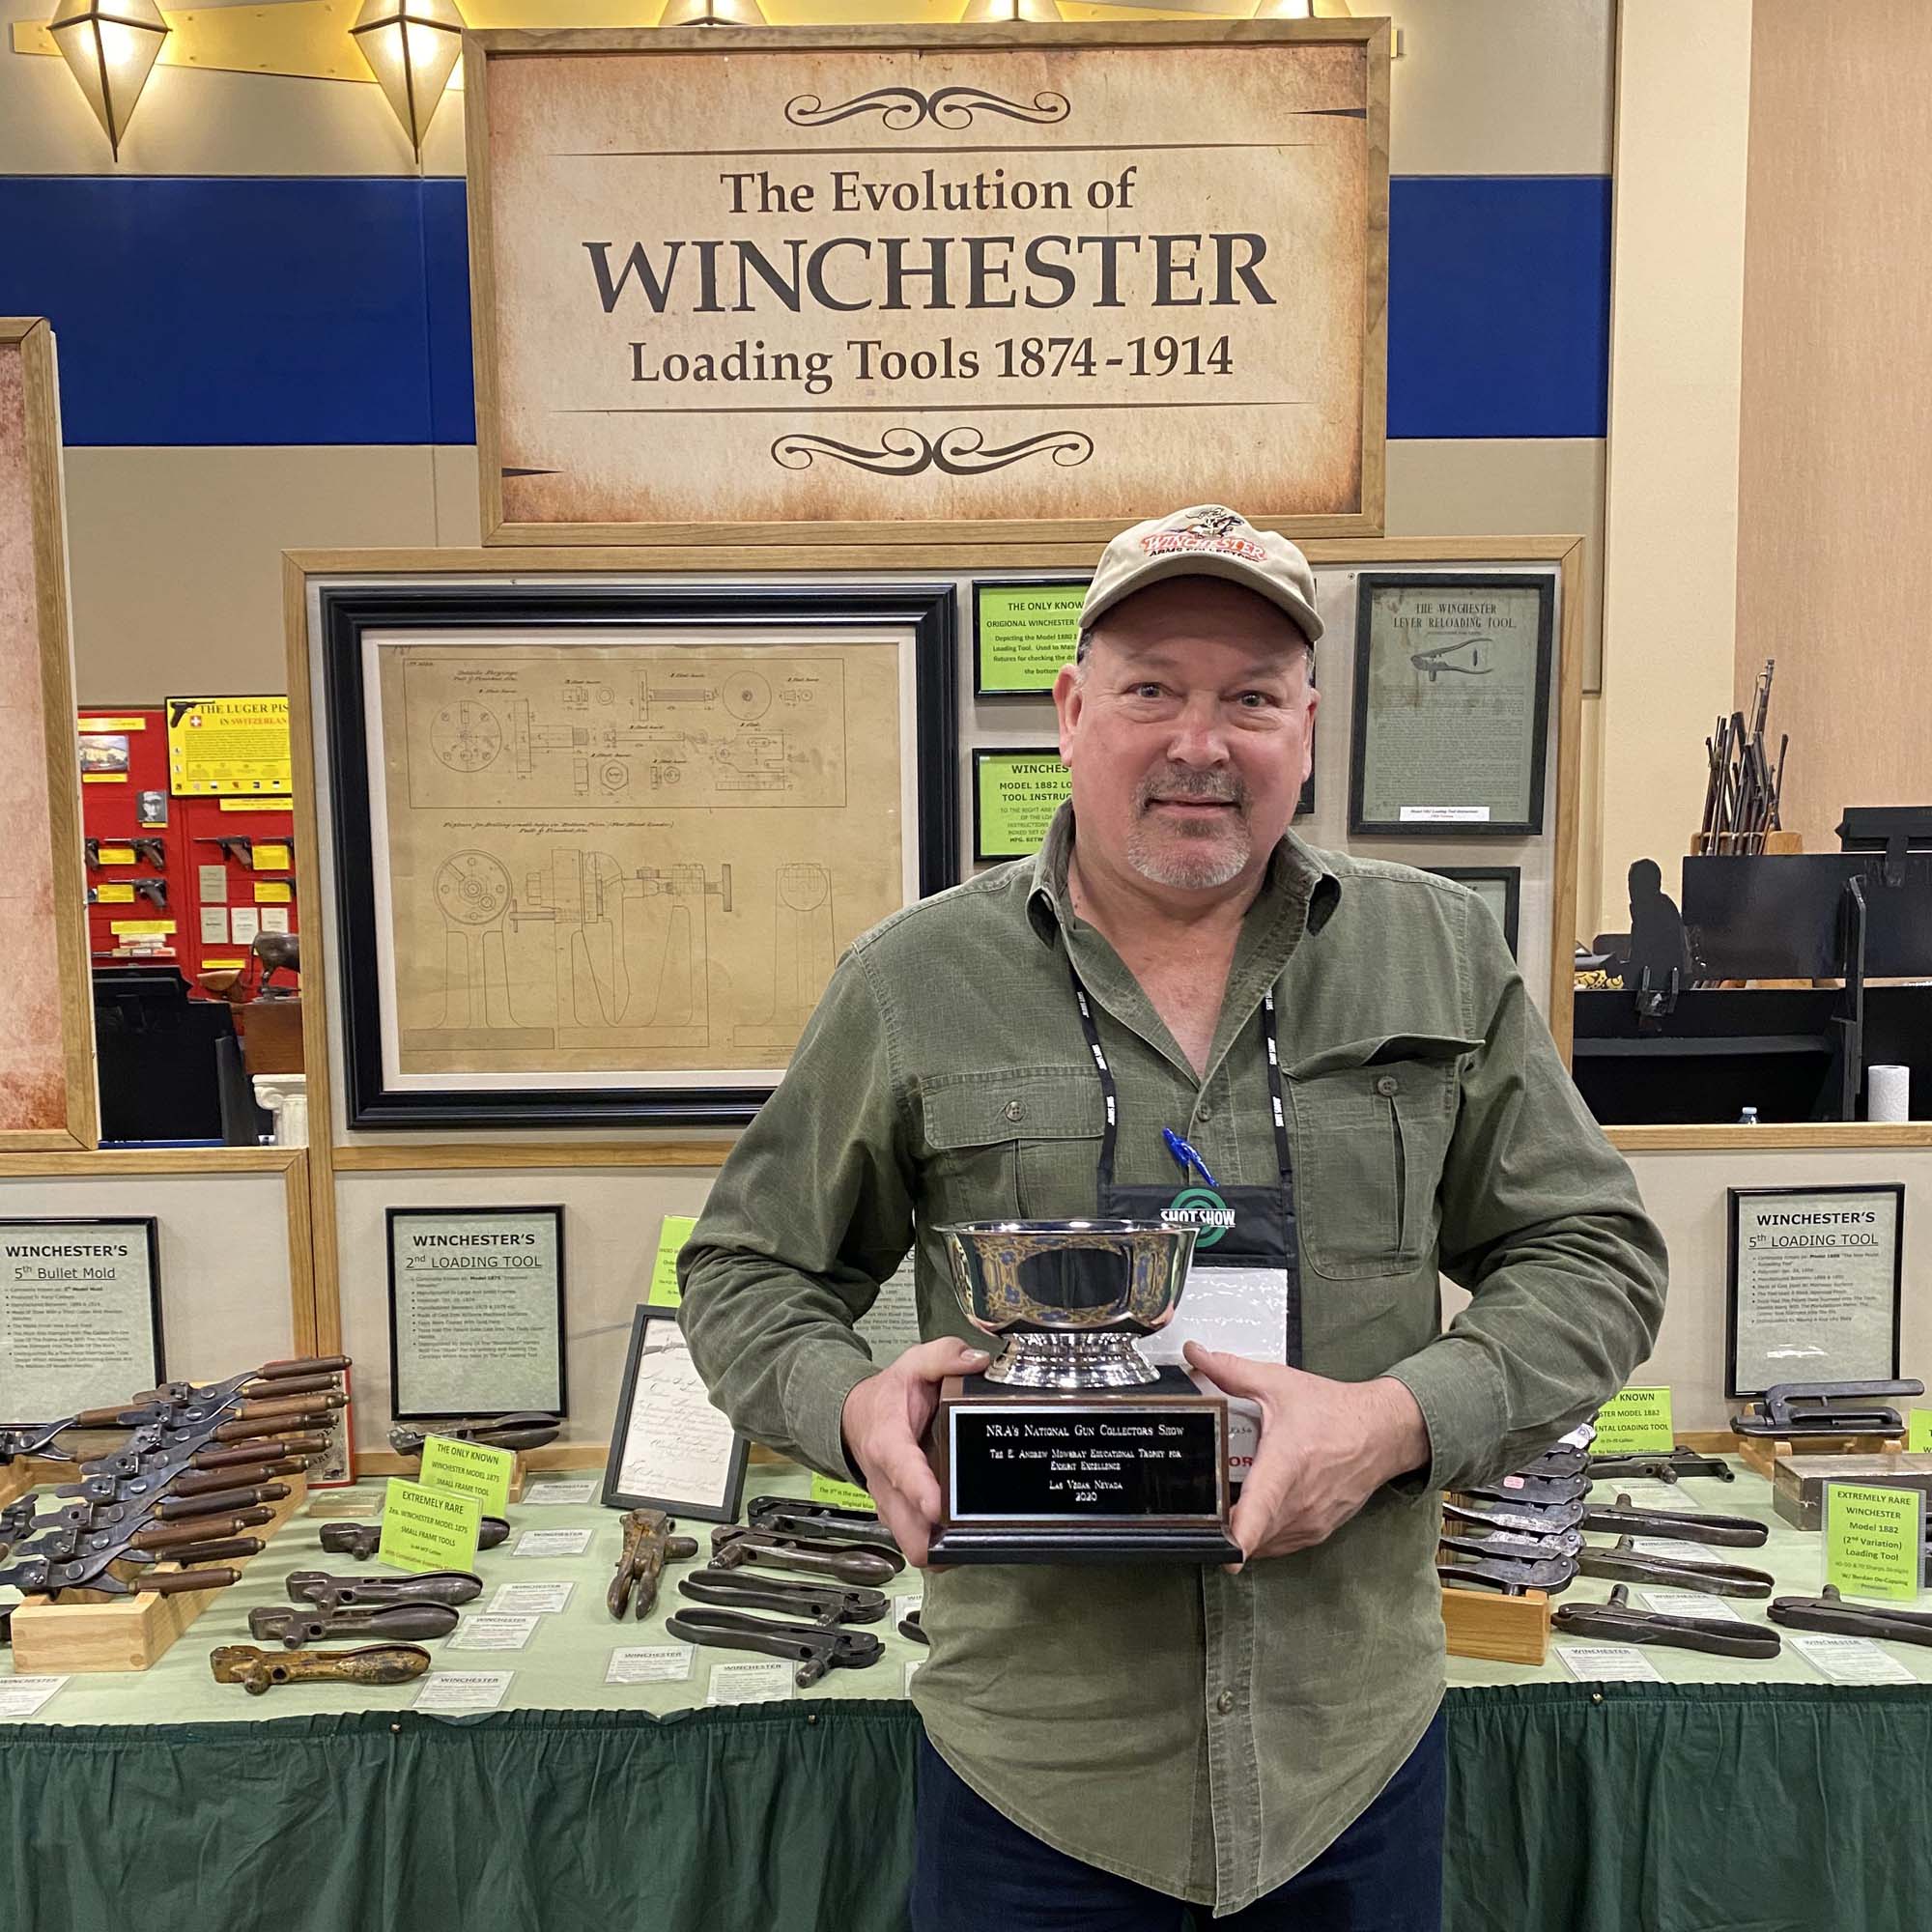 25th Annual NRA National Gun Collectors Show Awards - Mark Jones - The E. Andrew Mowbray Educational Trophy for Exhibit Excellence